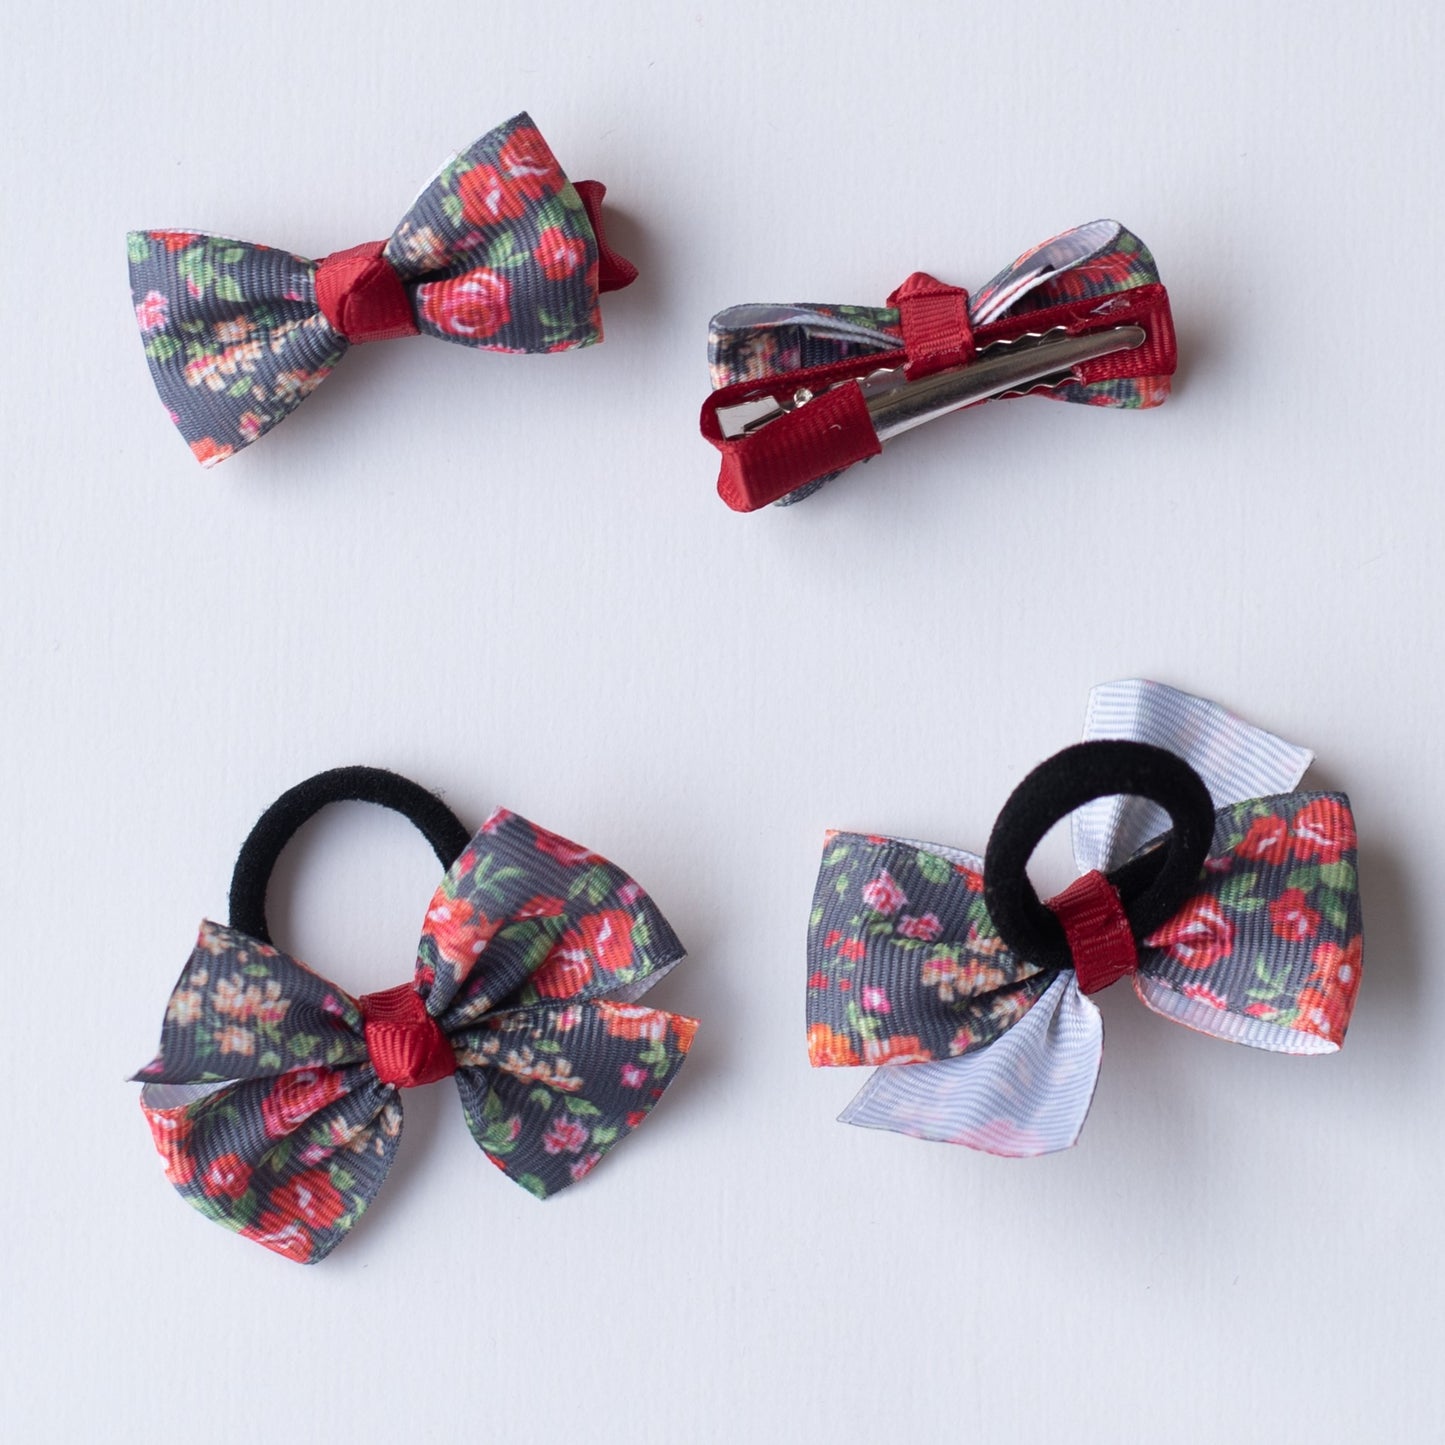 Combo: Floral print small bow on alligator clips and matching small rubberbands (4 nos) - Grey and Maroon.